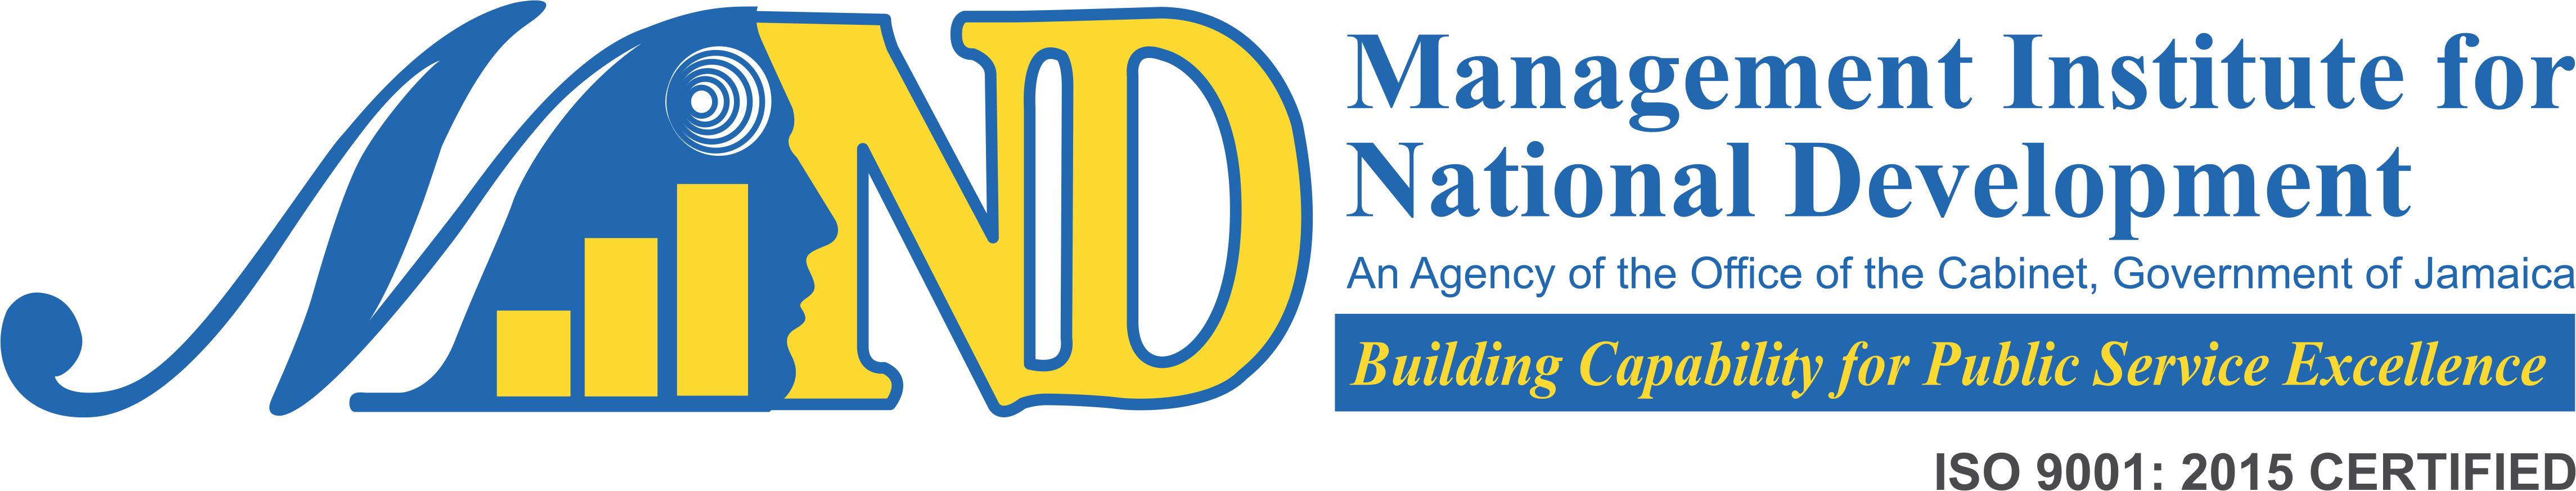 The Management Institute for National Development